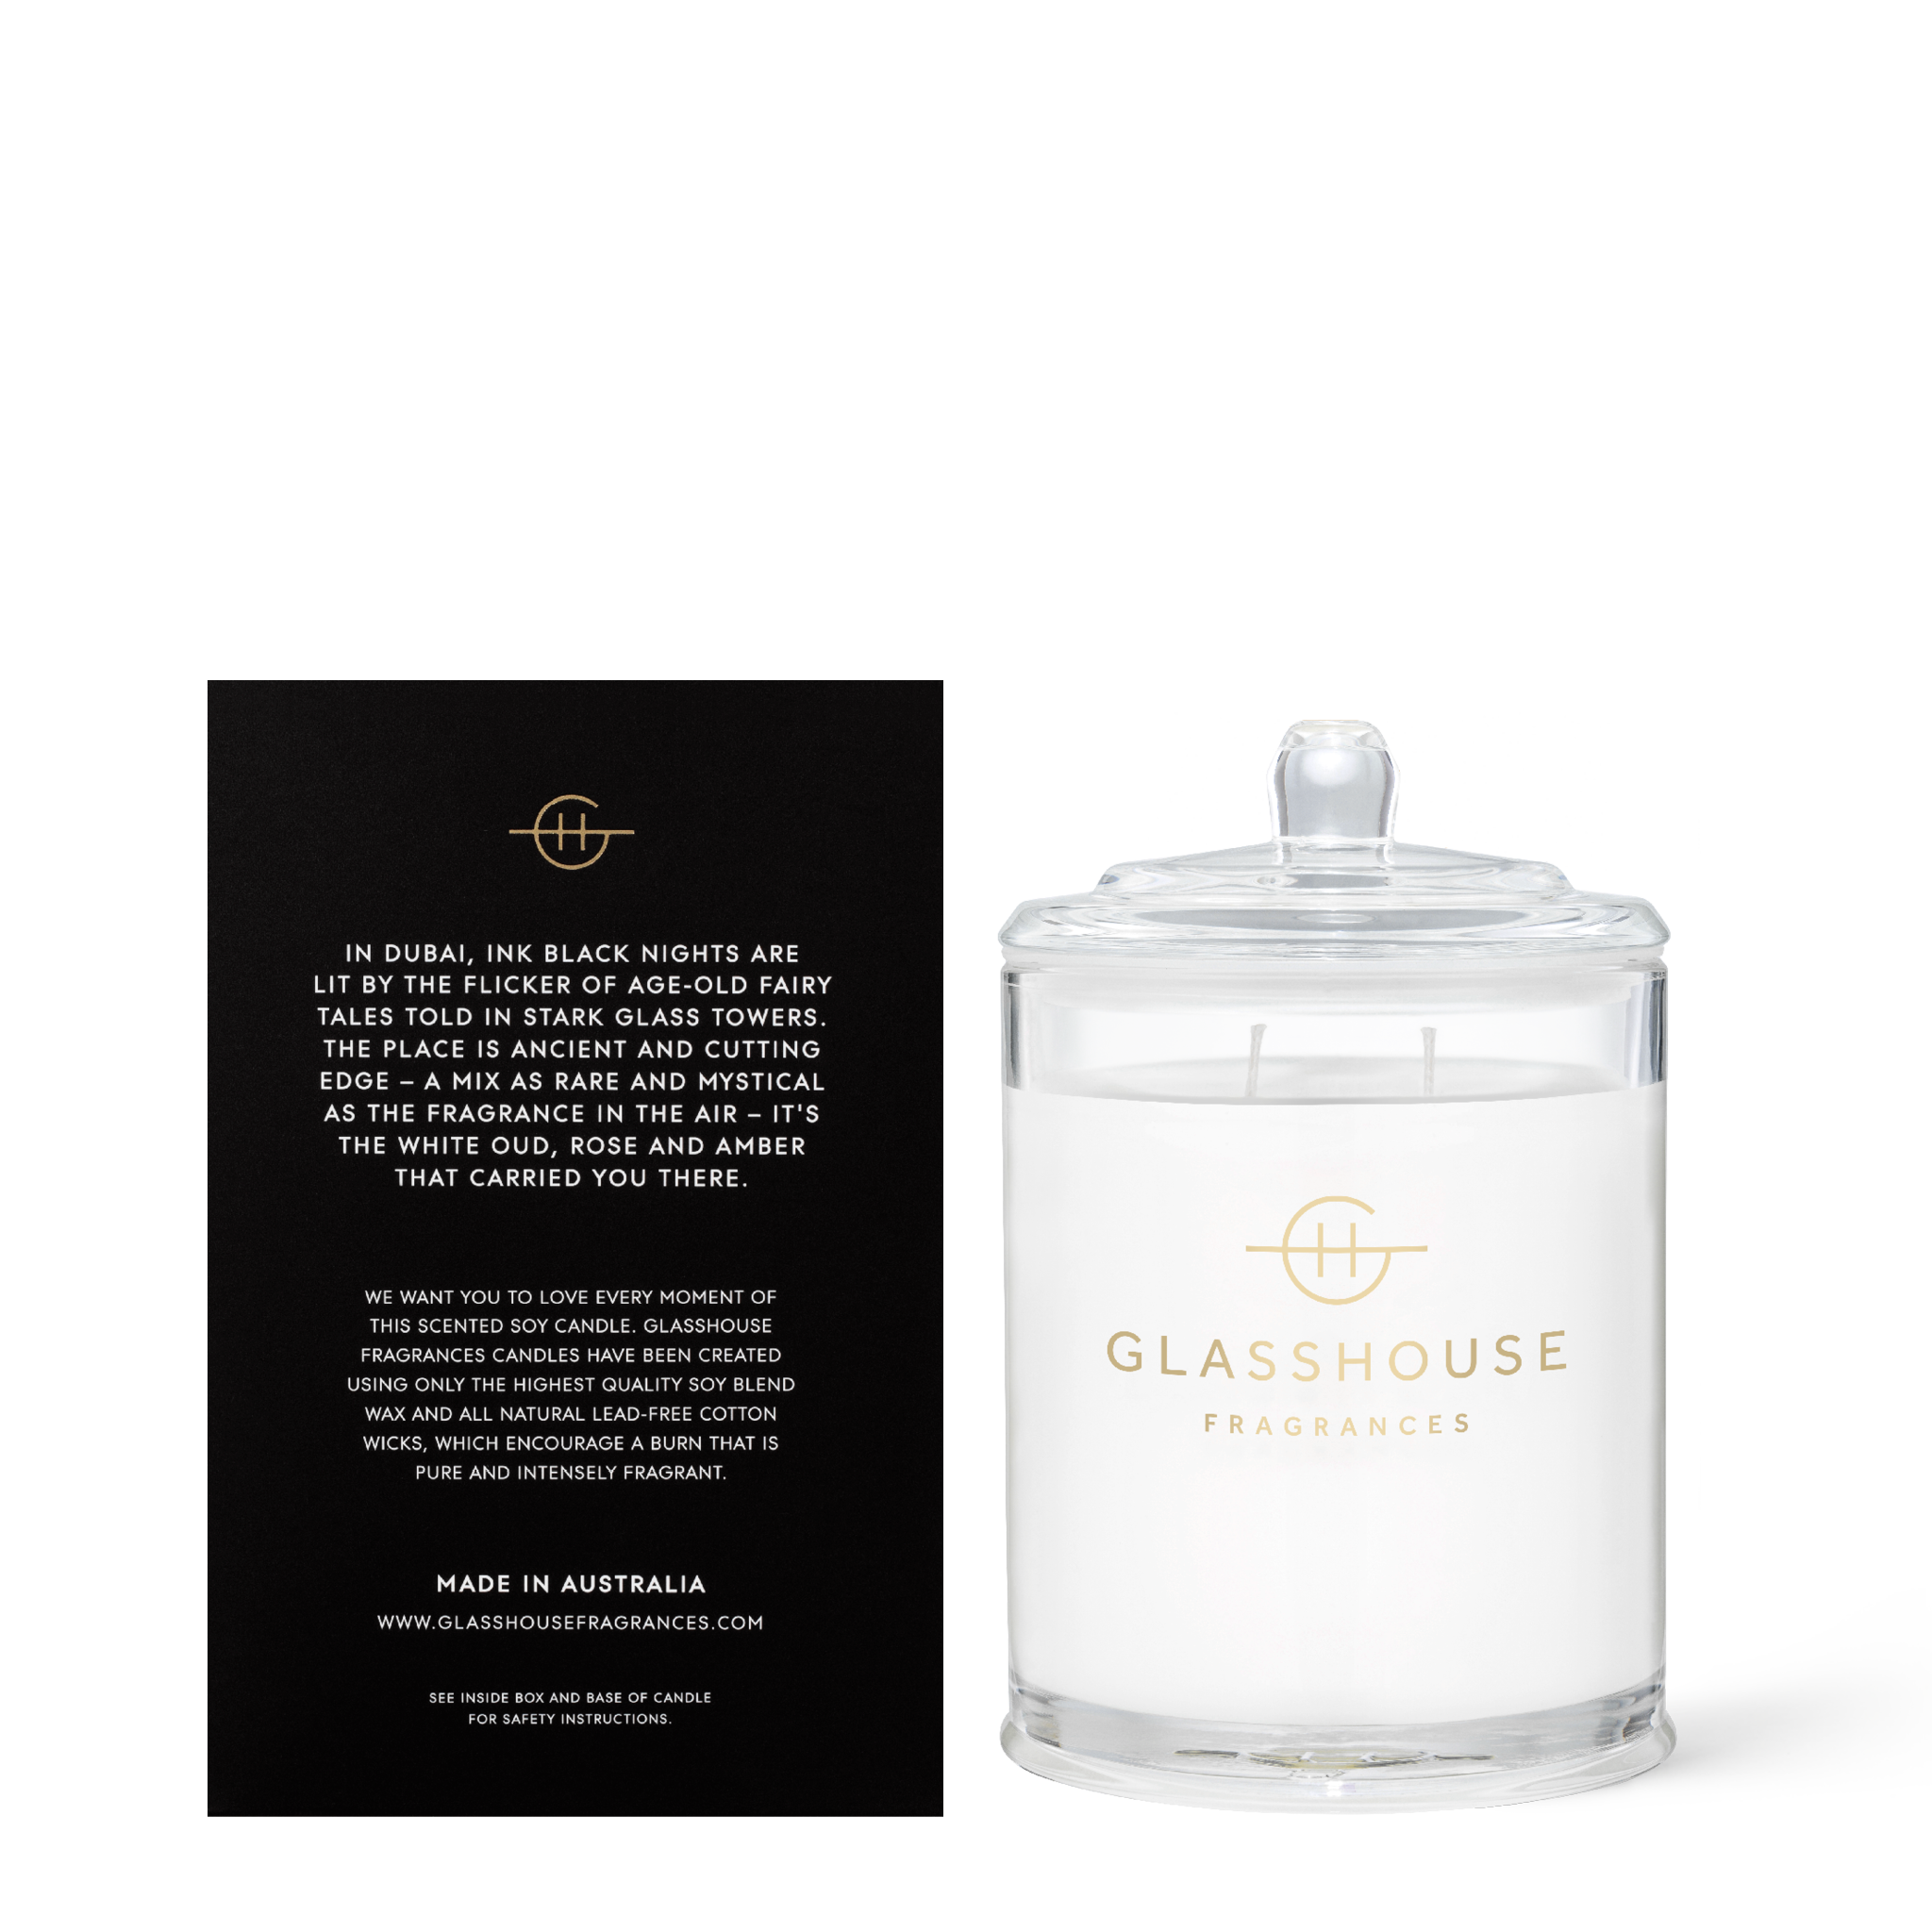 Glasshouse Fragrances Arabian Nights White Oud 380g Soy Candle with box - Back of product shot